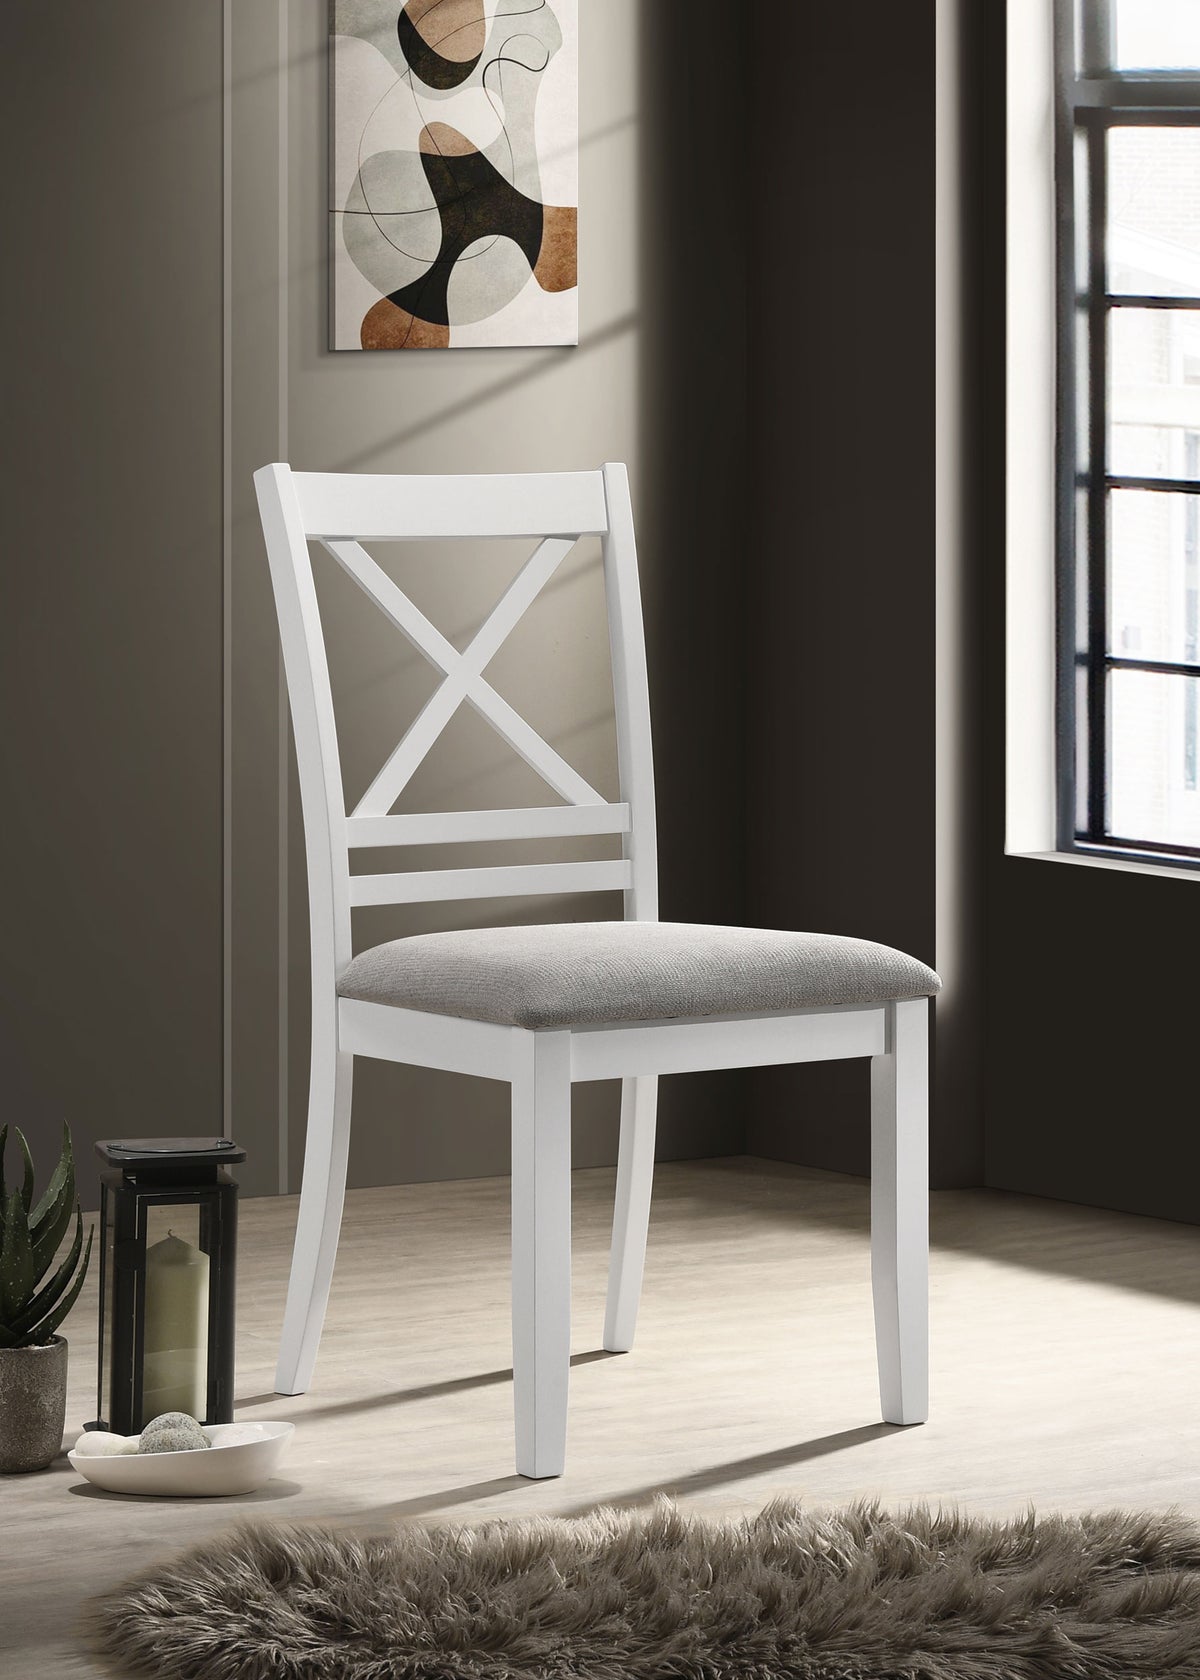 Hollis Cross Back Wood Dining Side Chair White Hollis Cross Back Wood Dining Side Chair White Half Price Furniture